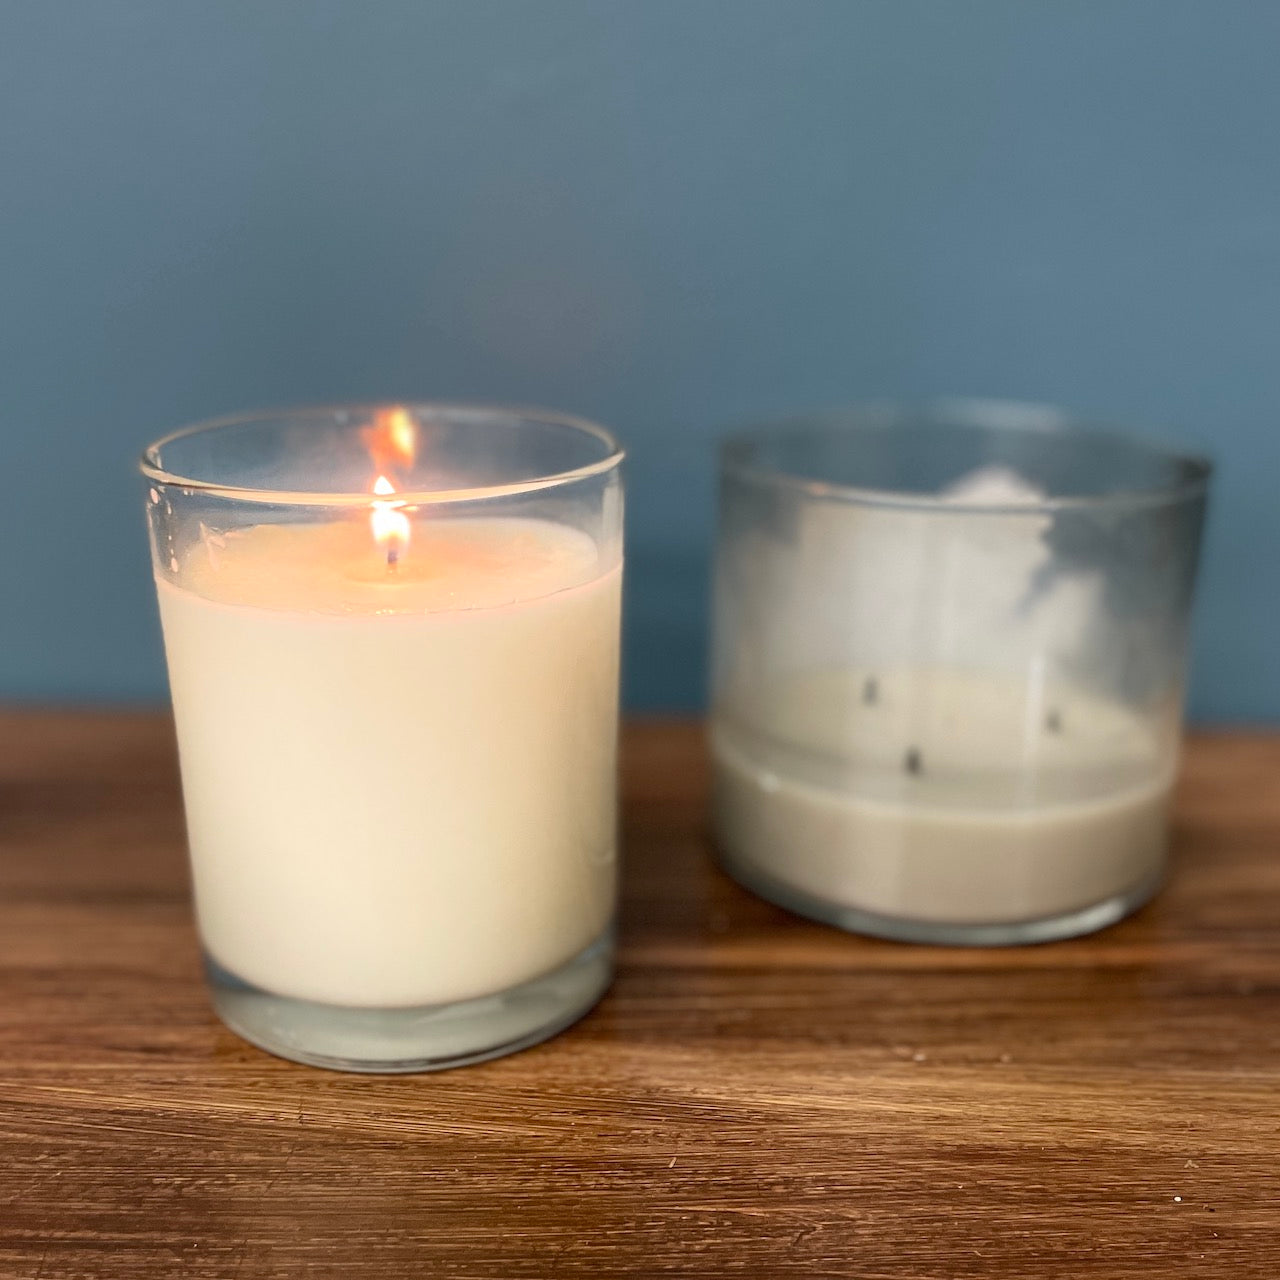 a kalamazoo candle being compared to another candle showing longer burn time